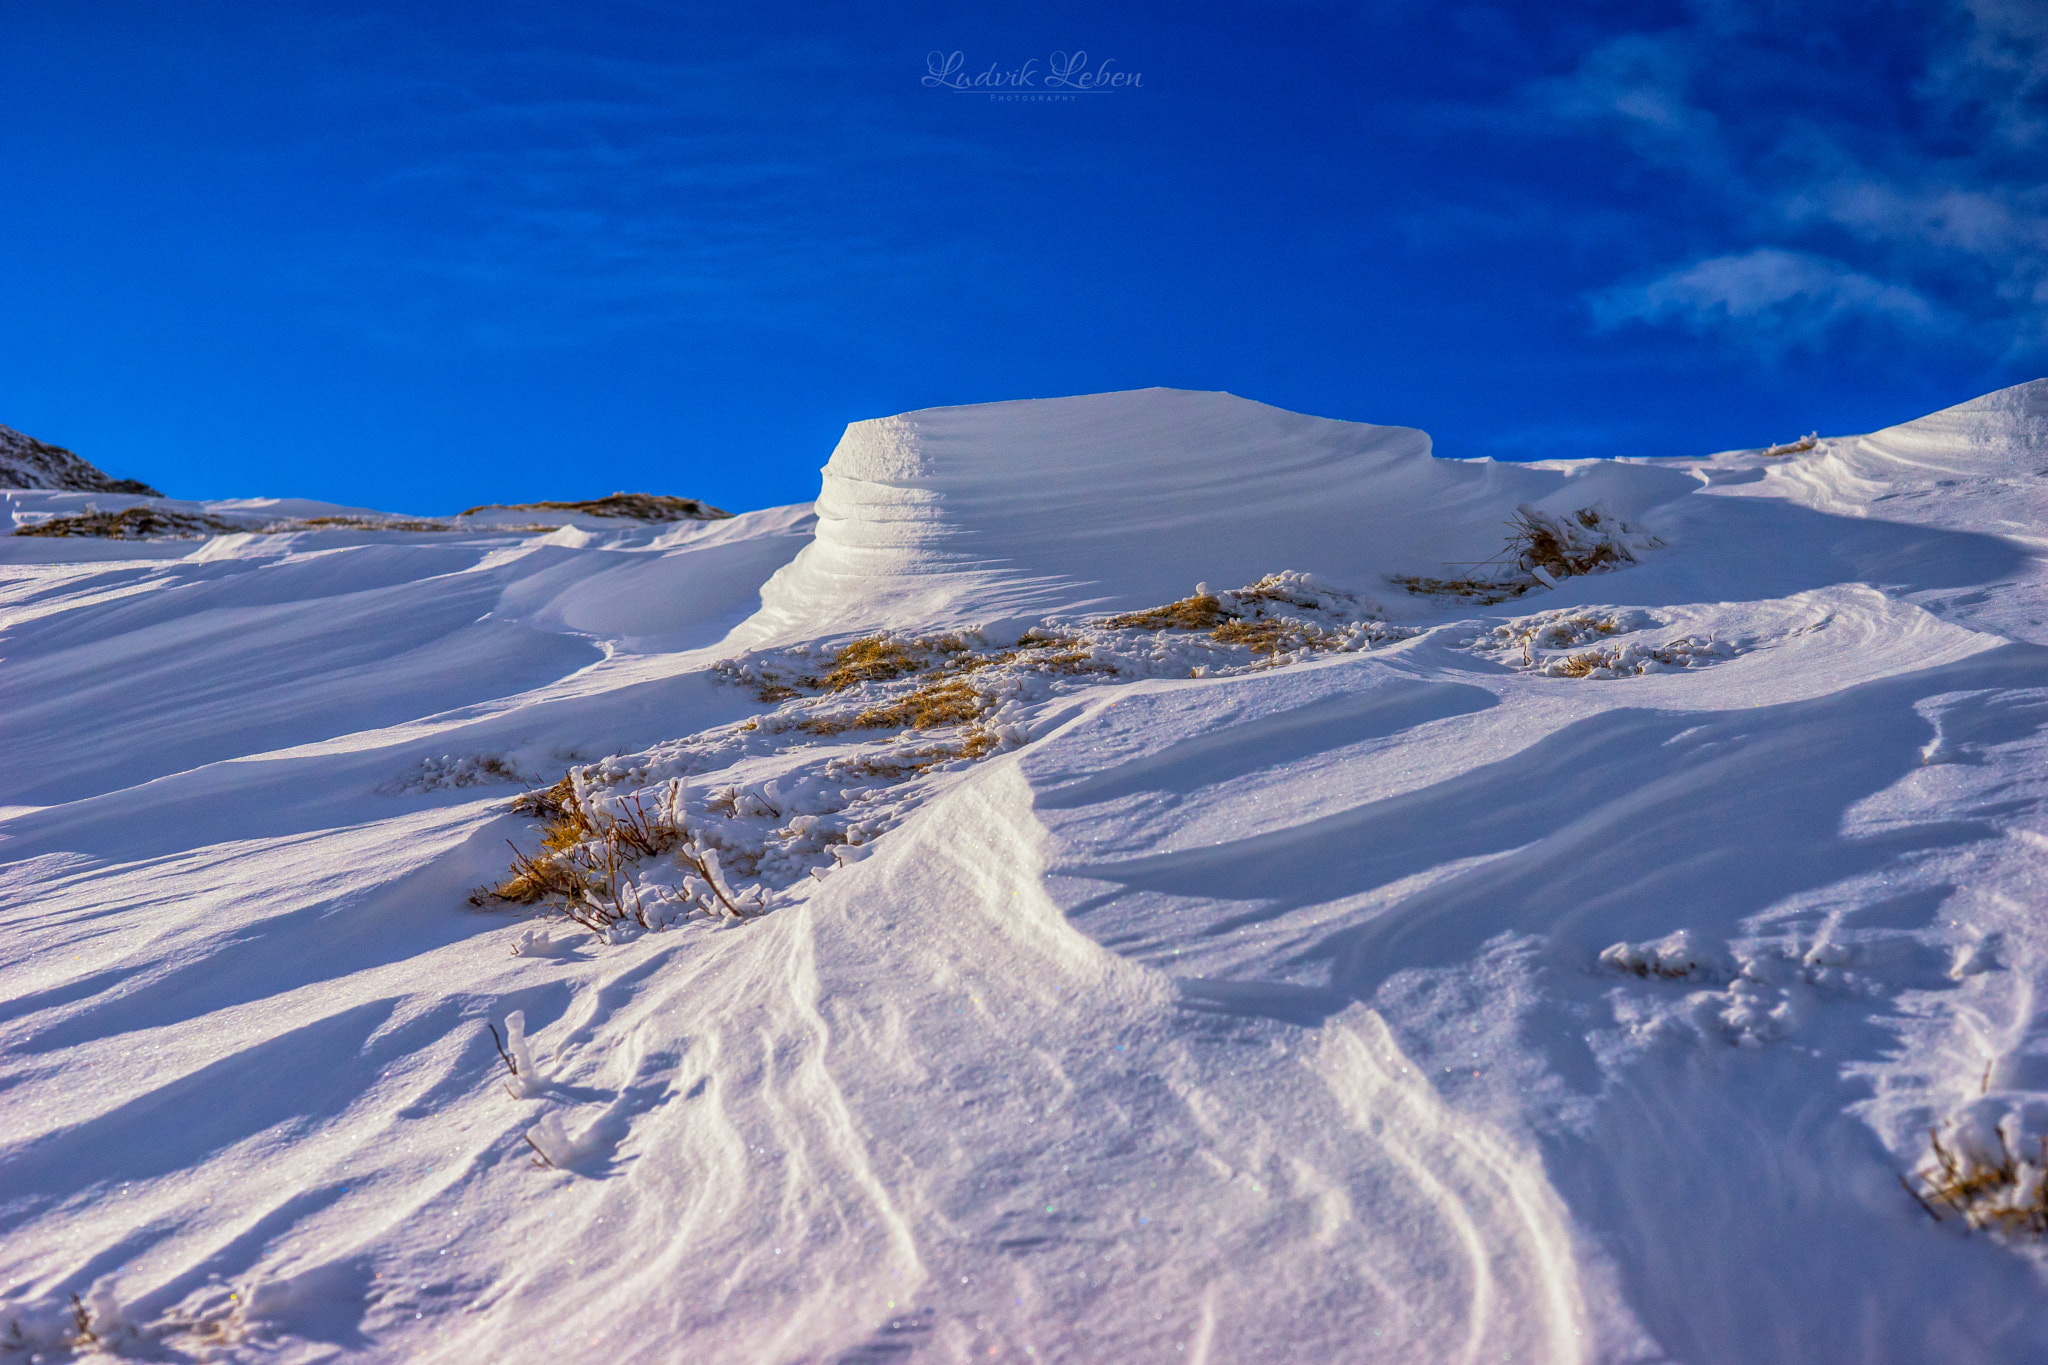 Sony a7 II sample photo. Snow sculpture photography